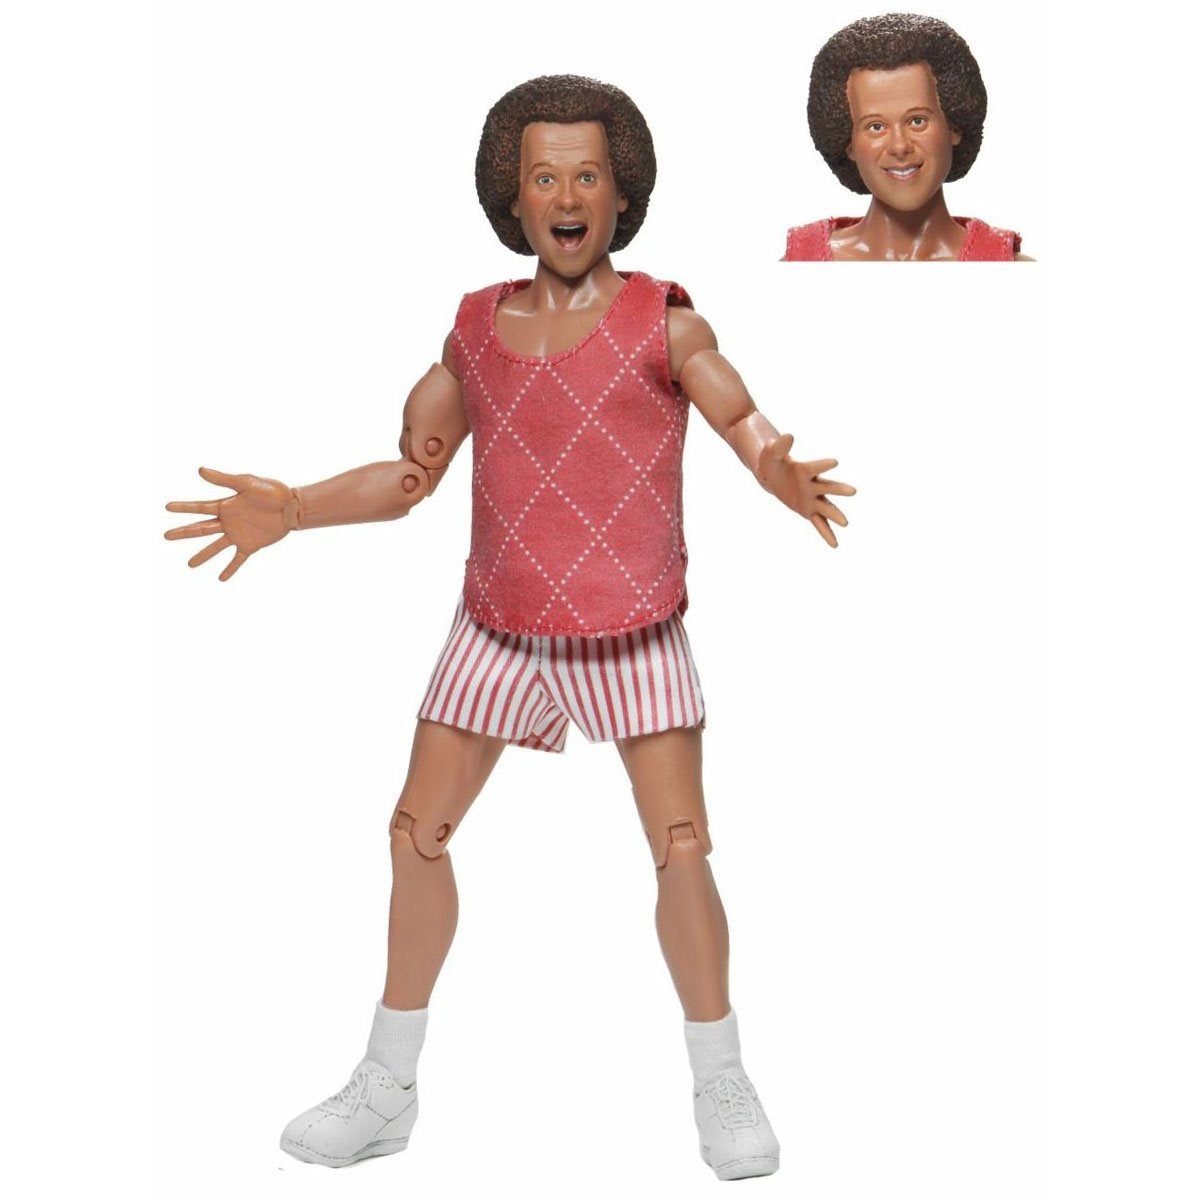 NECA Actionfigur NECA RICHARD SIMMONS 8 INCH CLOTHED ACTIONFIGUR